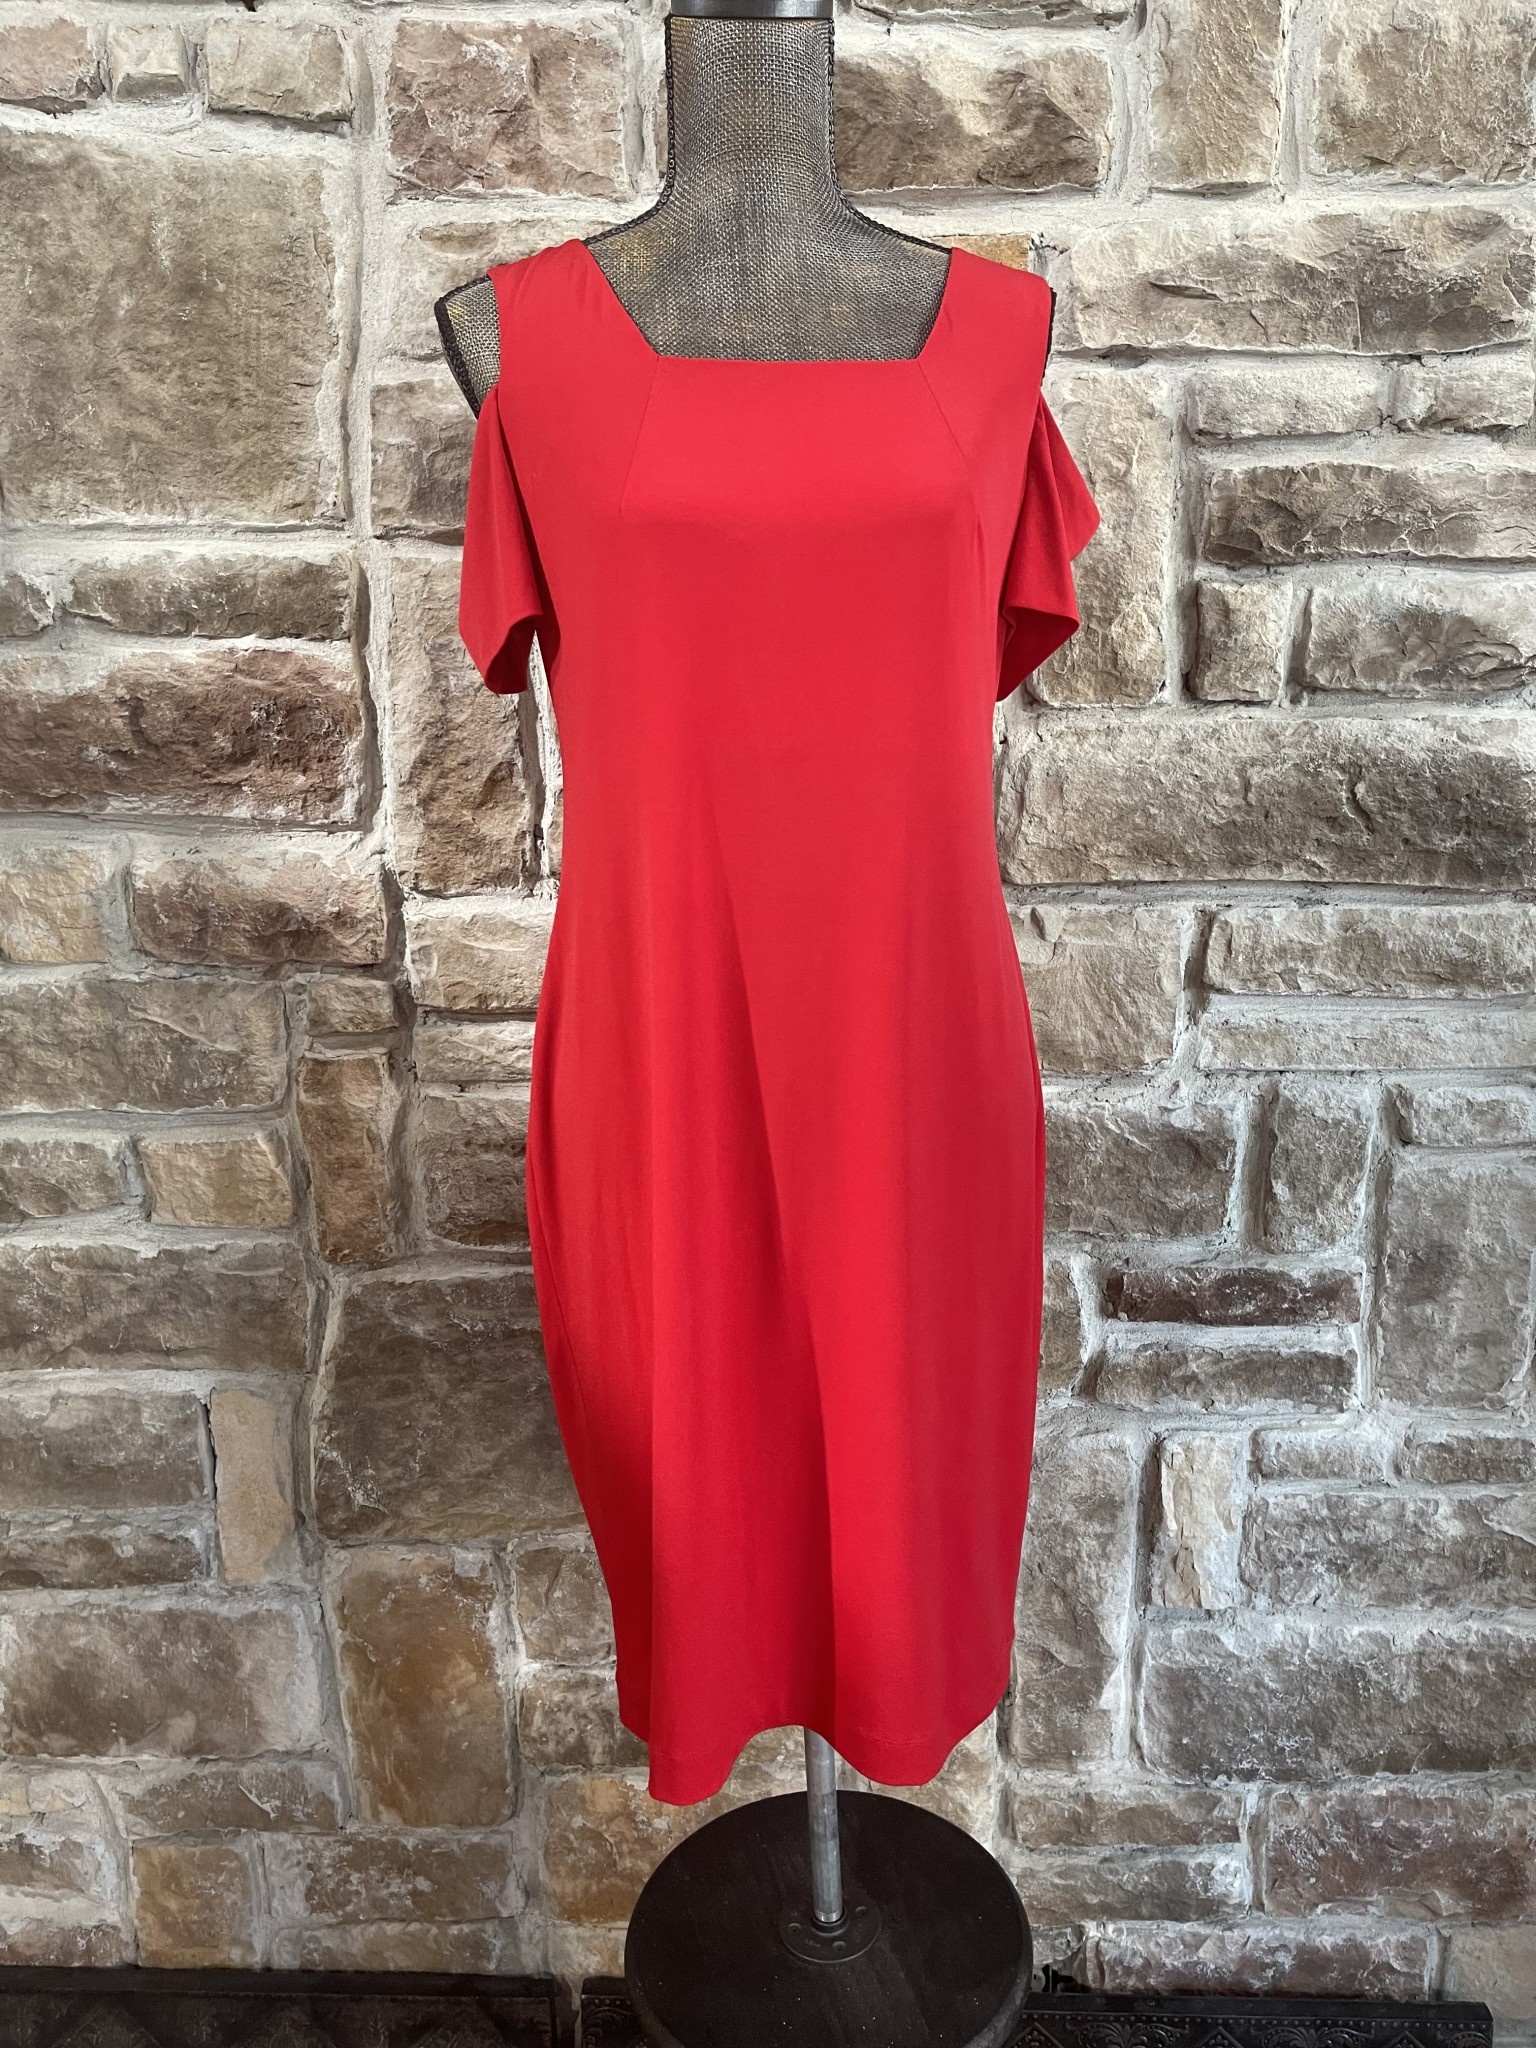 Calvin Klein Red Sheath Dress with Cut Out Sleeves, Size 10 - Elements  Unleashed